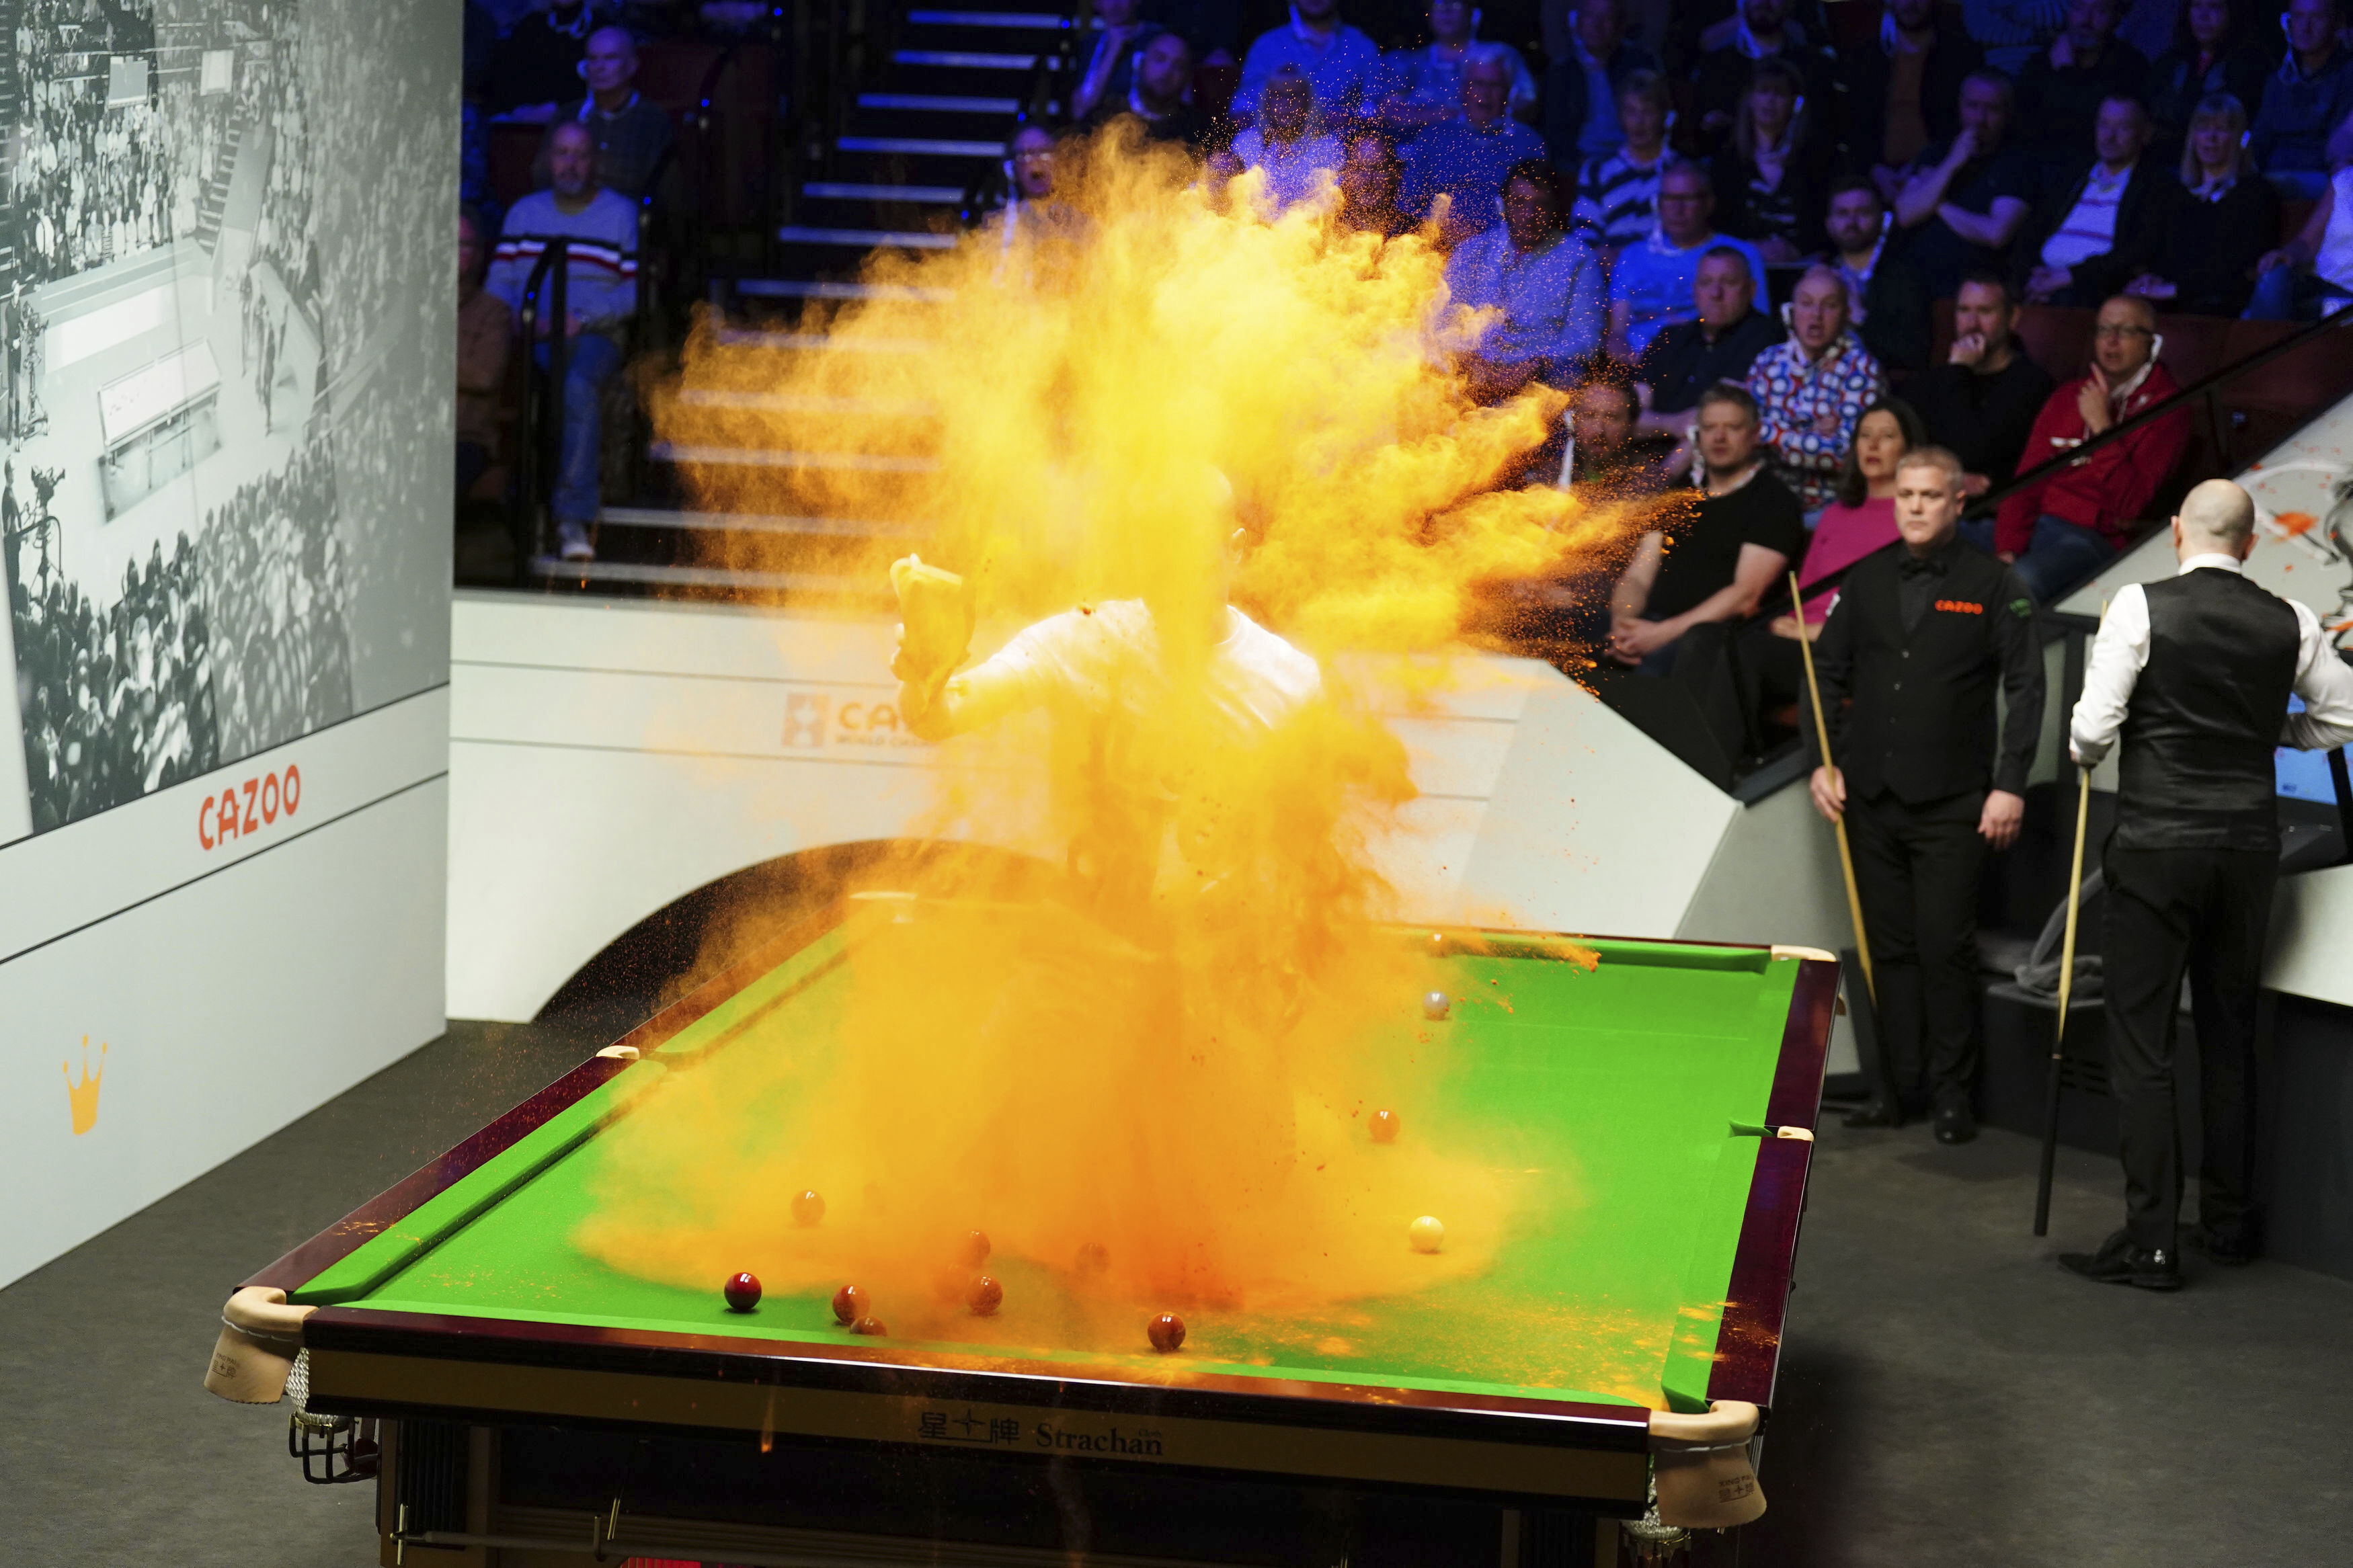 Climate protesters interrupt world snooker championship with orange powder at Crucible Theatre